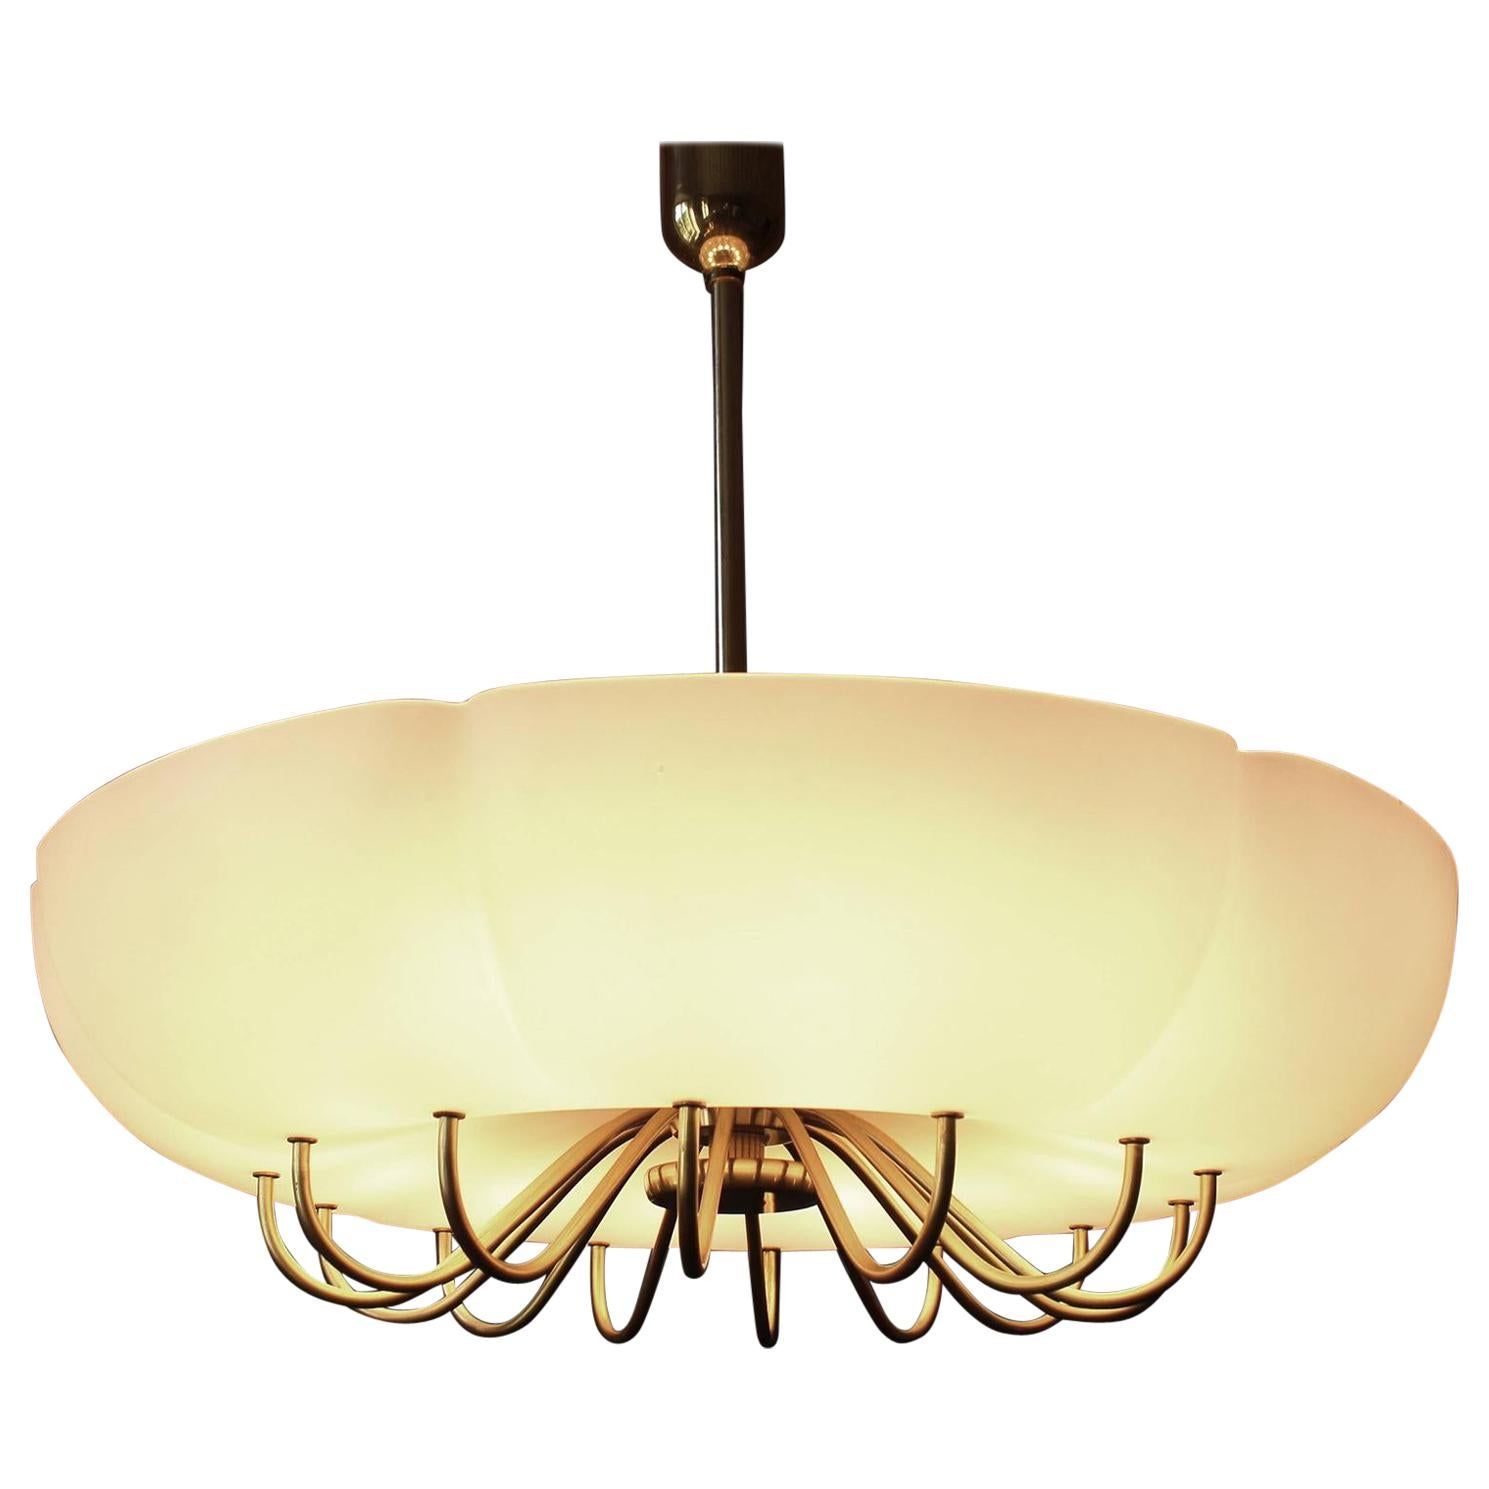 1 of 5 Ballroom Shell Brass Chandeliers, Germany, 1950s For Sale